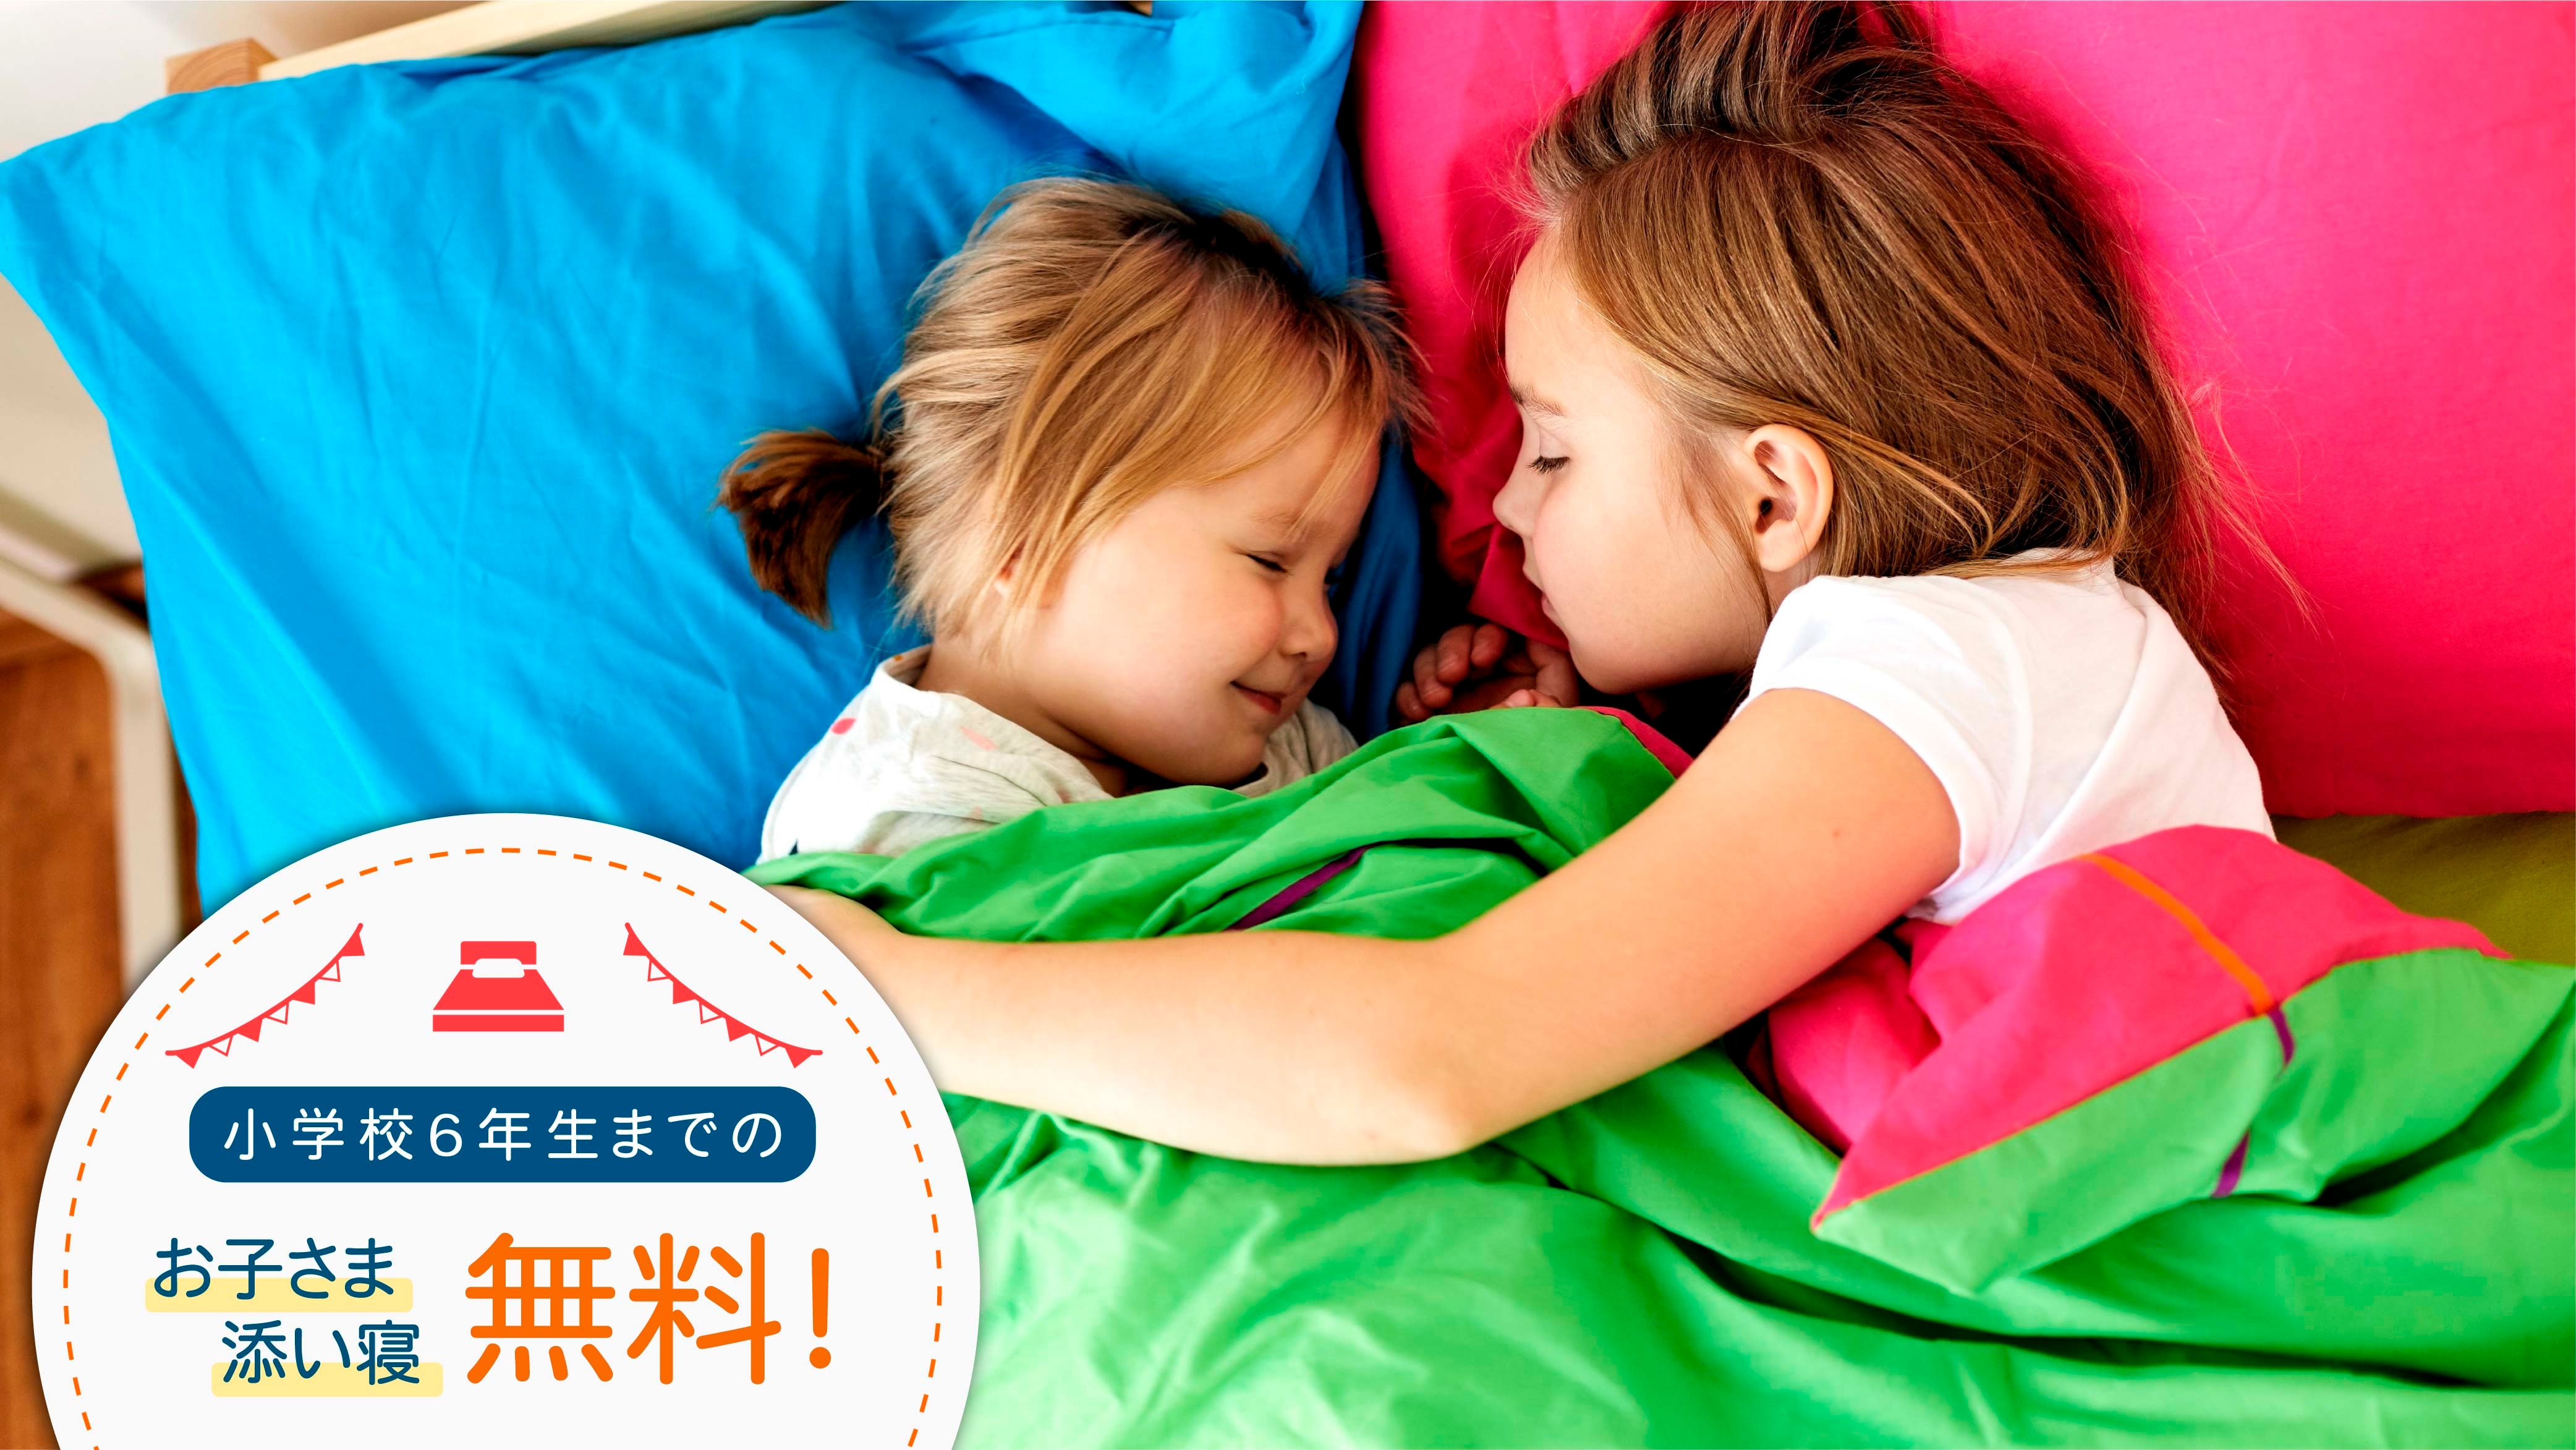 [Free bed-sharing for children] Bed-sharing for children up to 6th grade is free of charge.